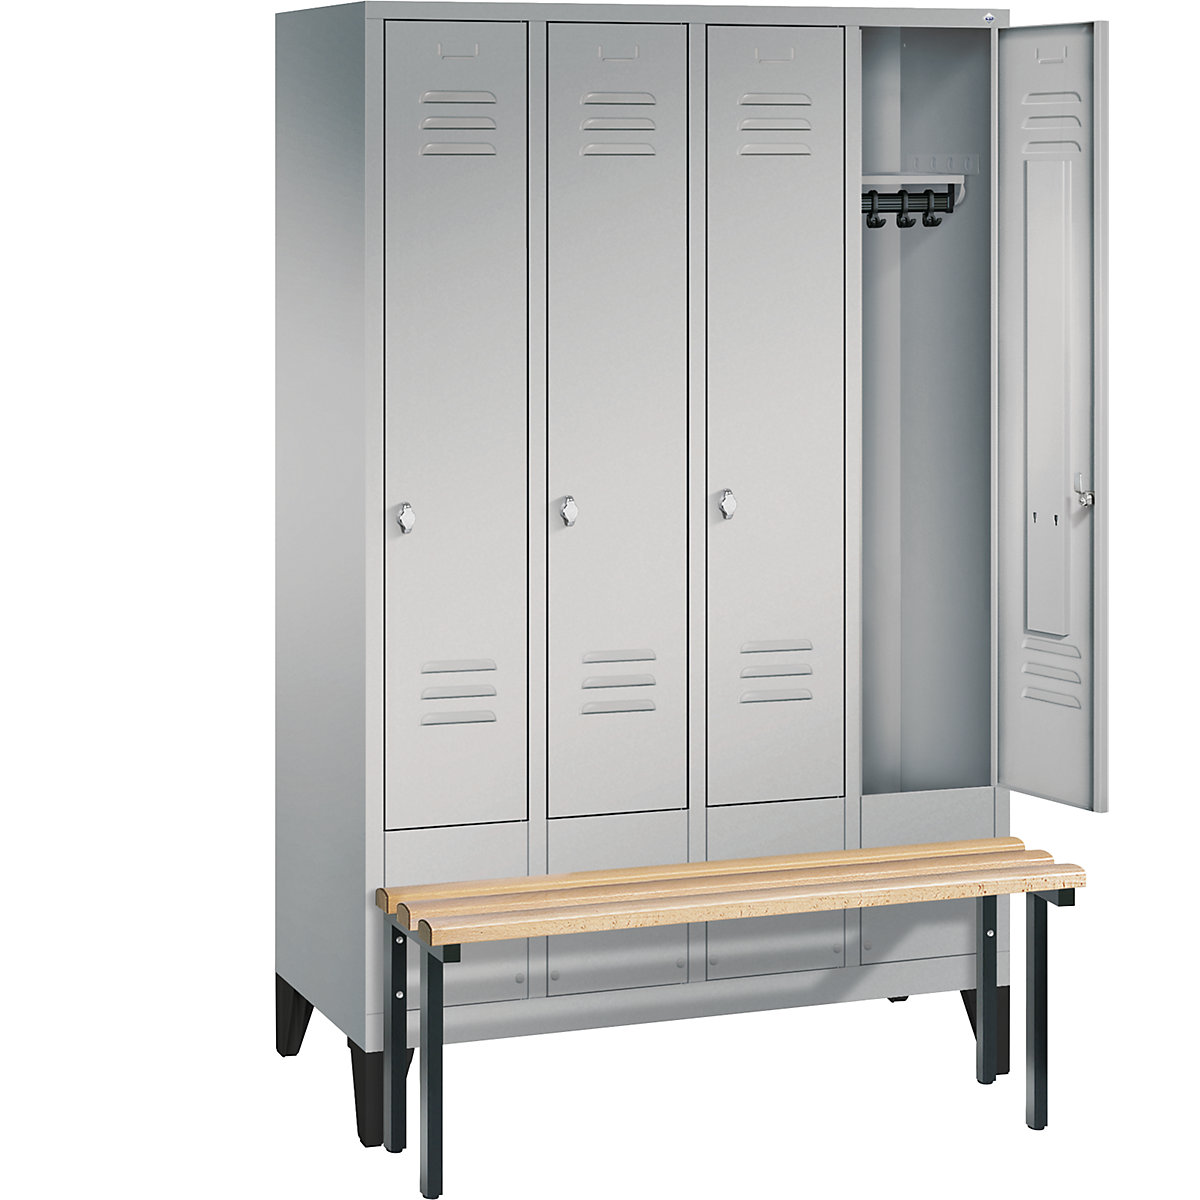 CLASSIC cloakroom locker with bench mounted in front – C+P (Product illustration 18)-17